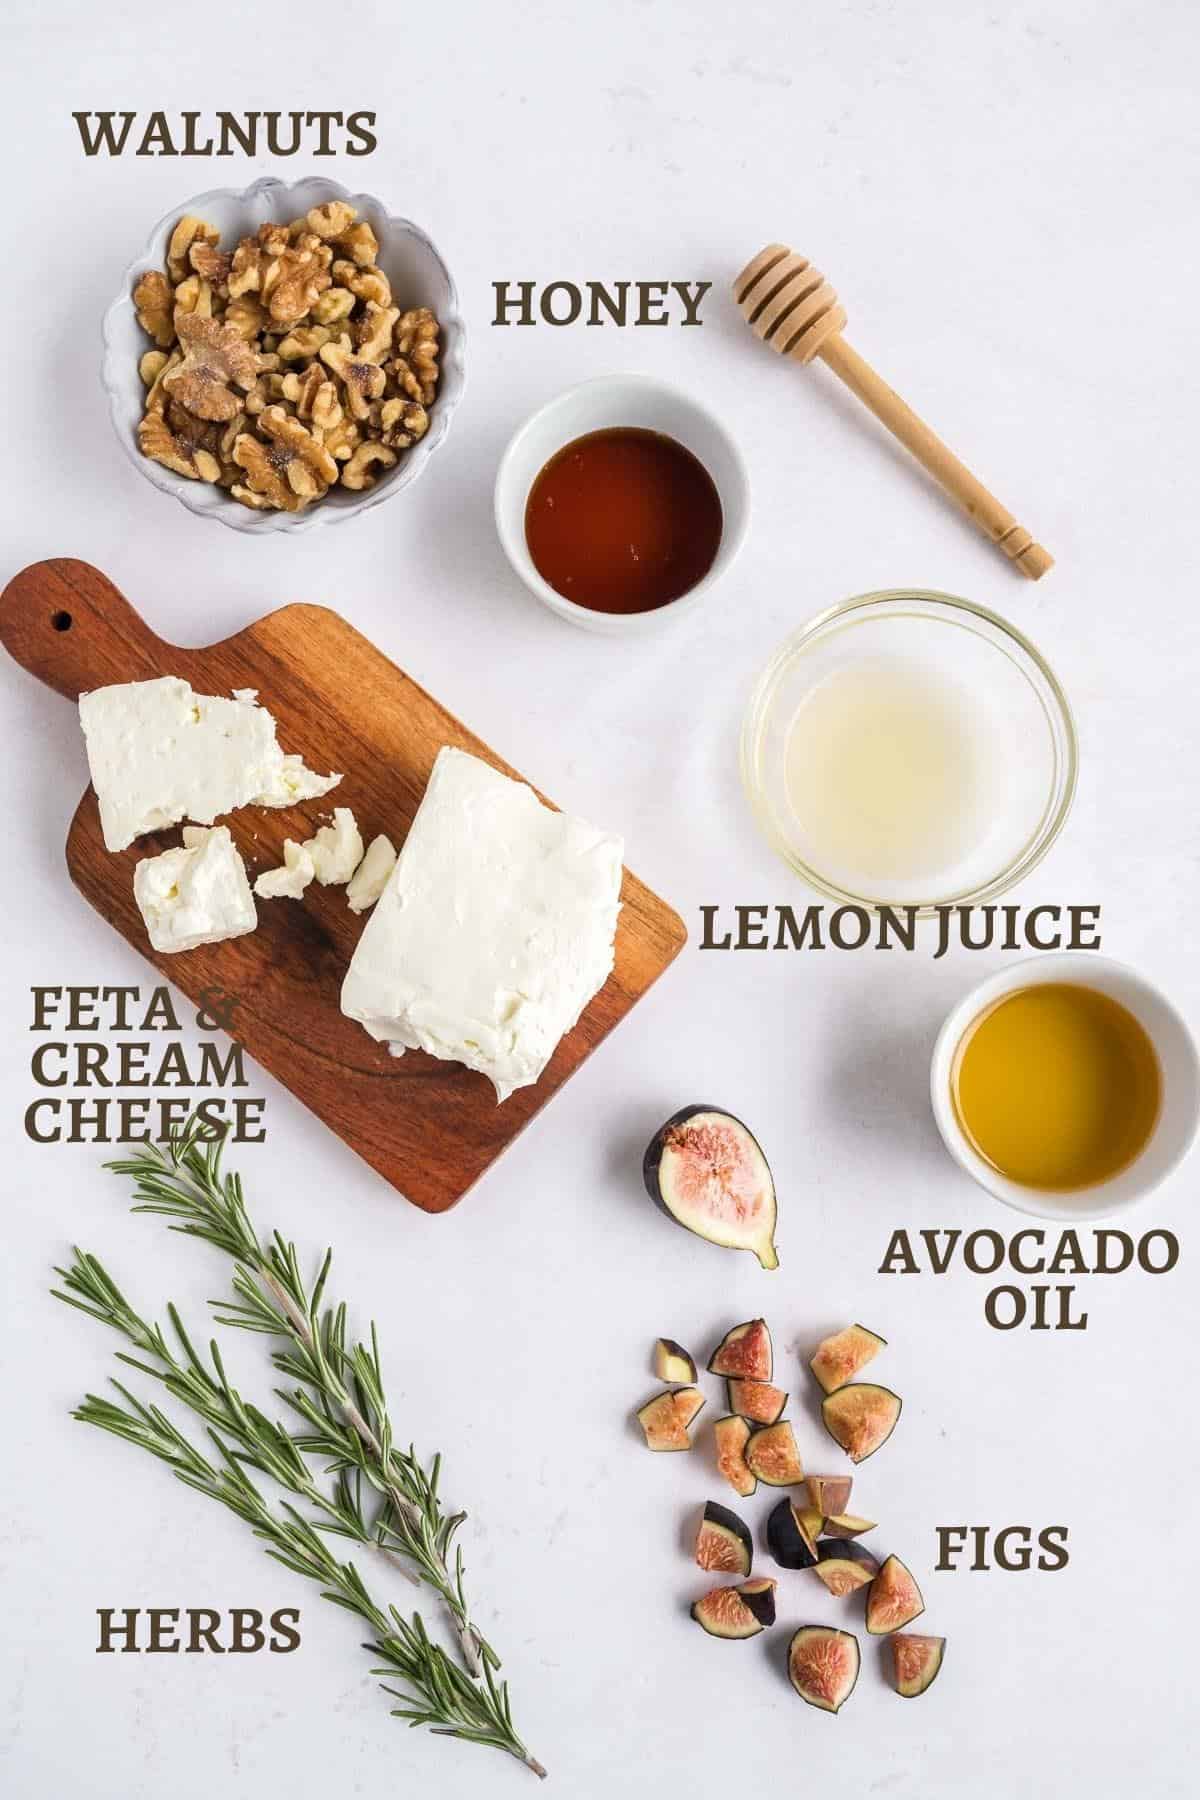 Image of ingredients needed to make whipped feta dip with labels titling each item.